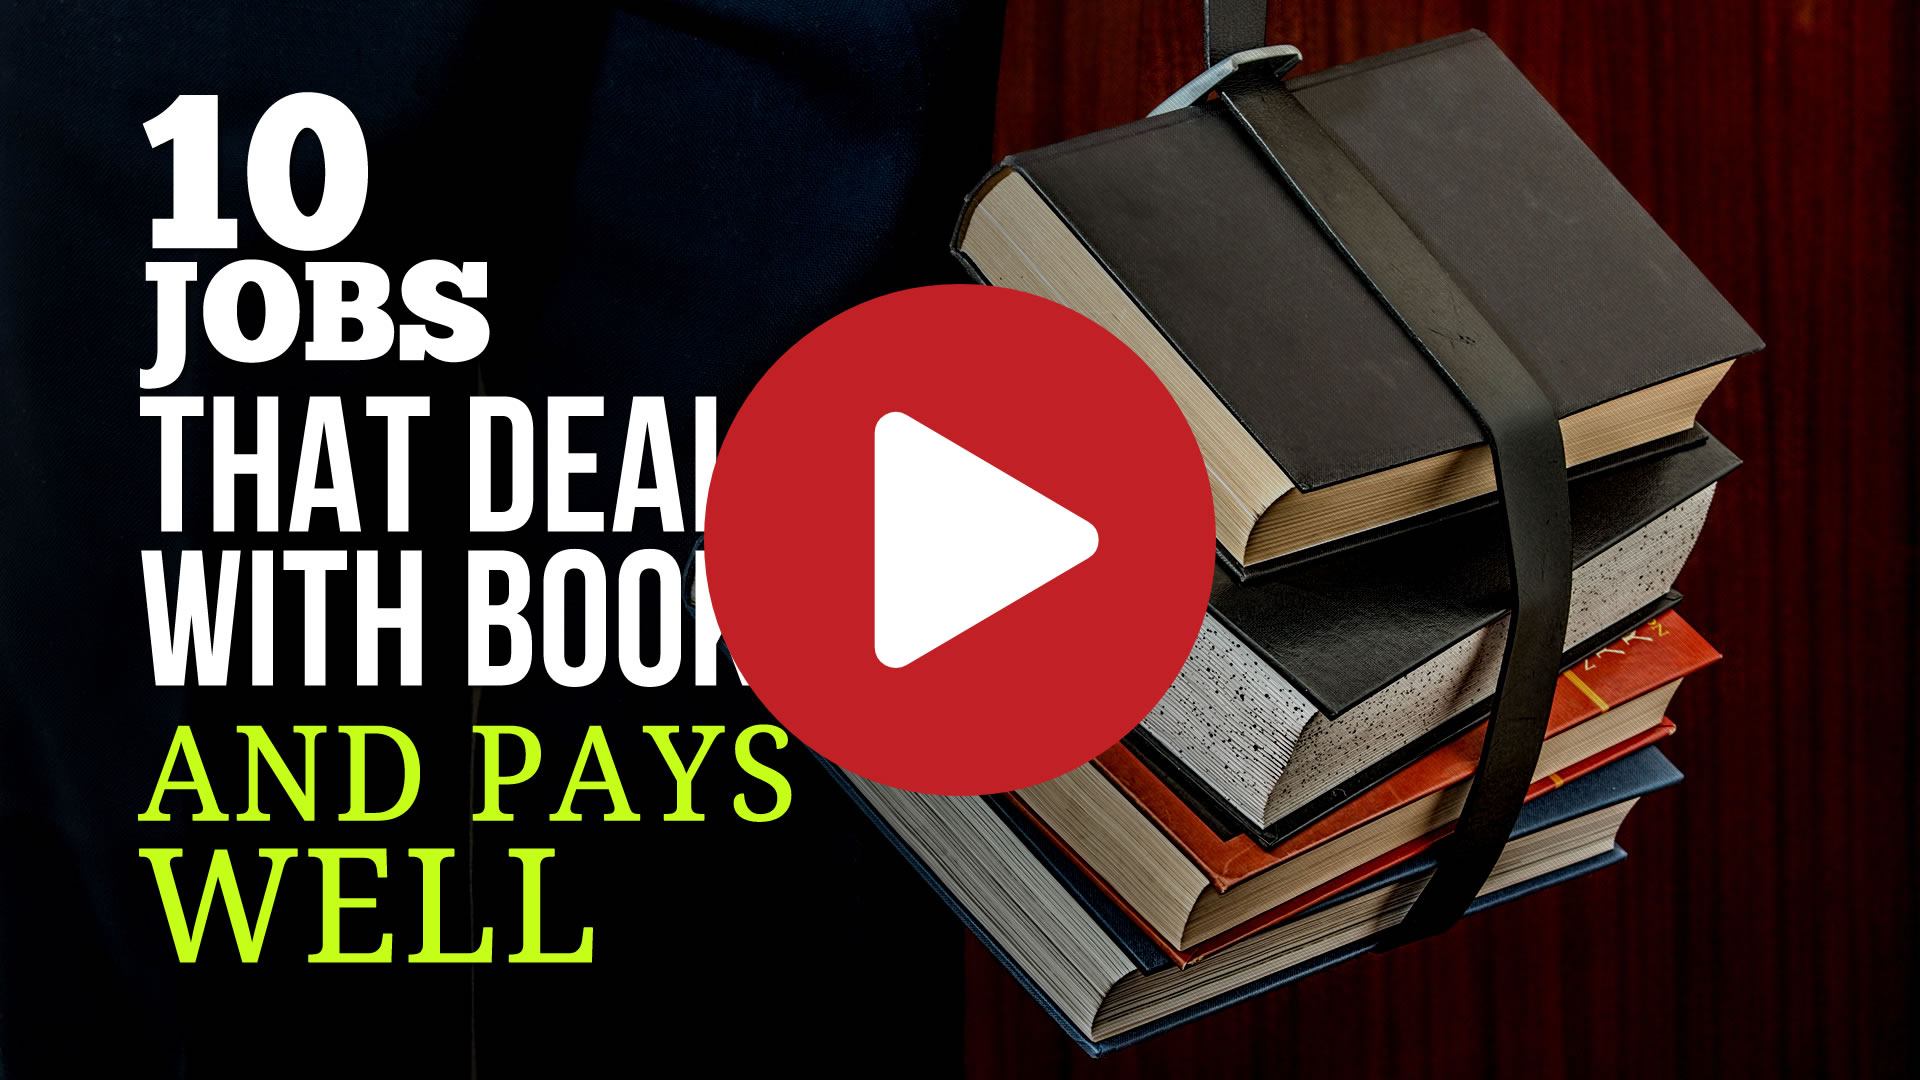 10 Jobs That Deals With Books and Pays Well